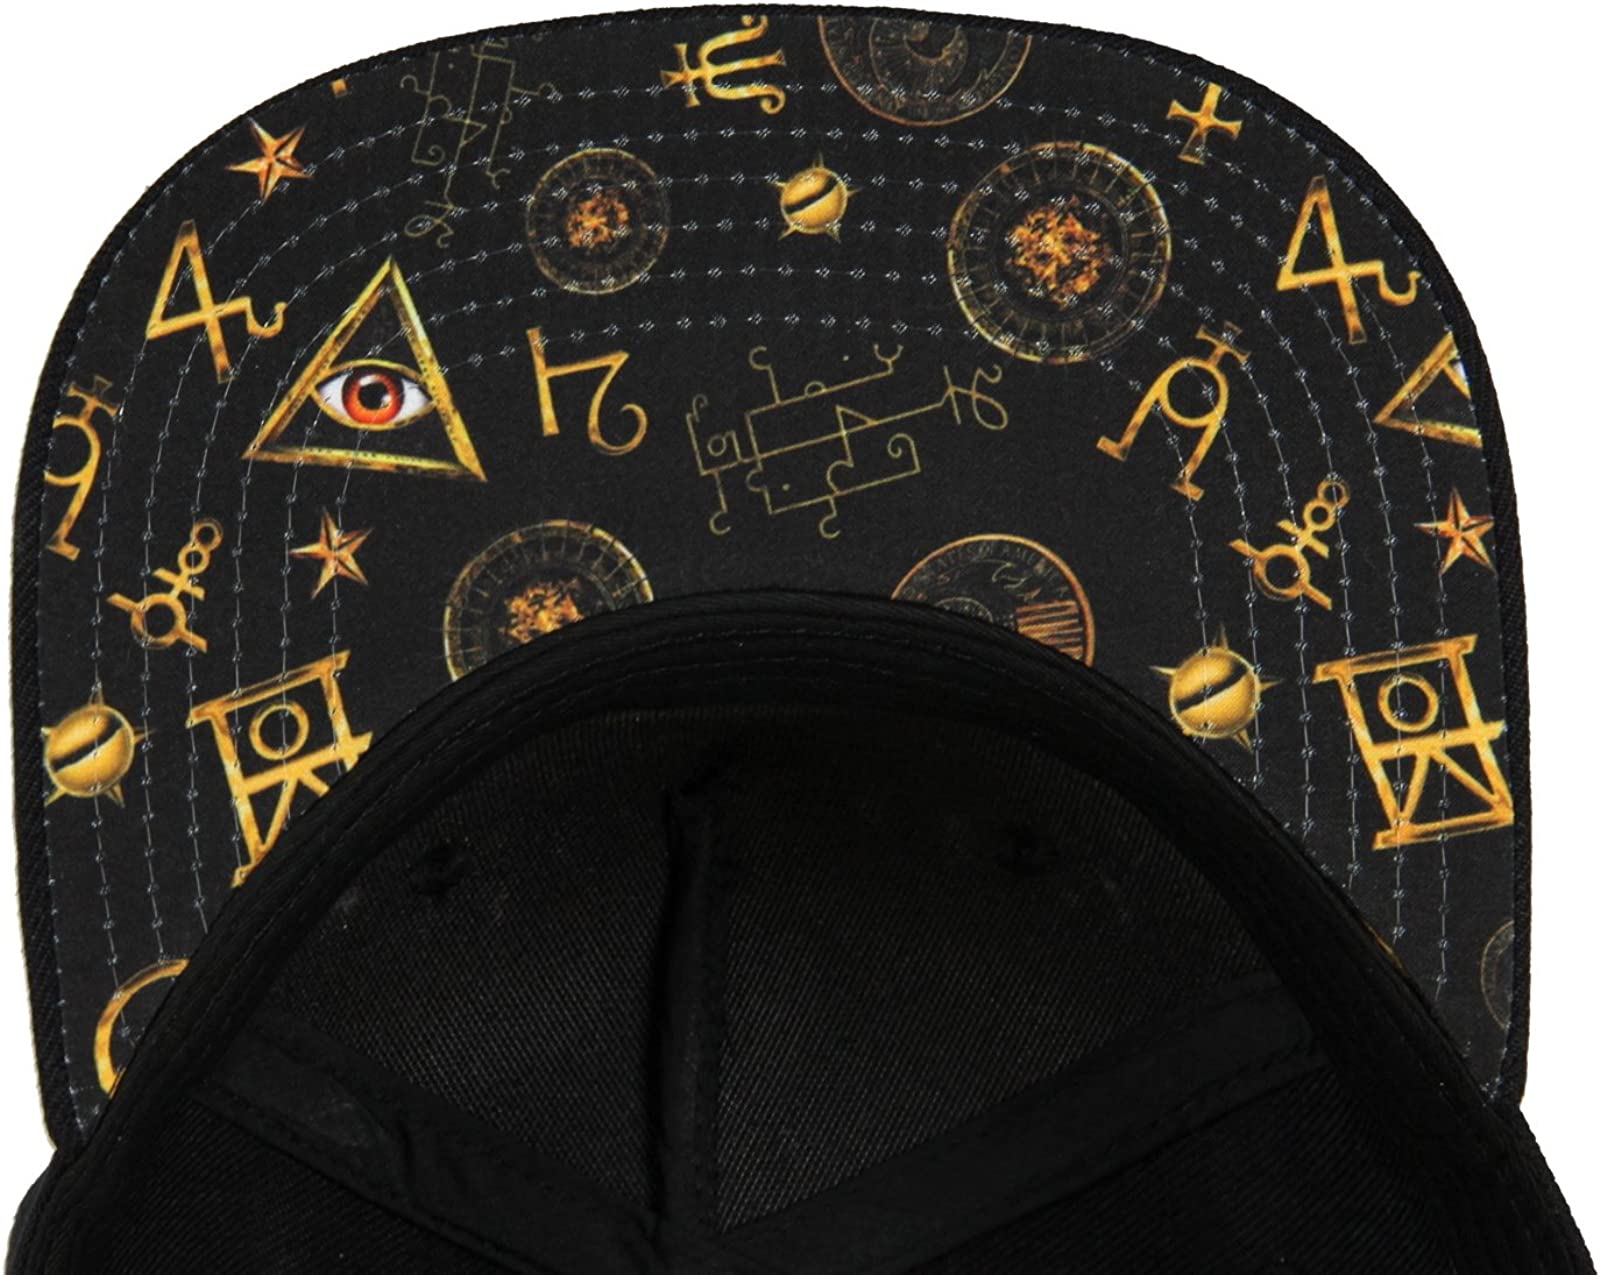 Bioworld Fantastic Beasts and Where to Find Them Macusa Shield Black Snapback